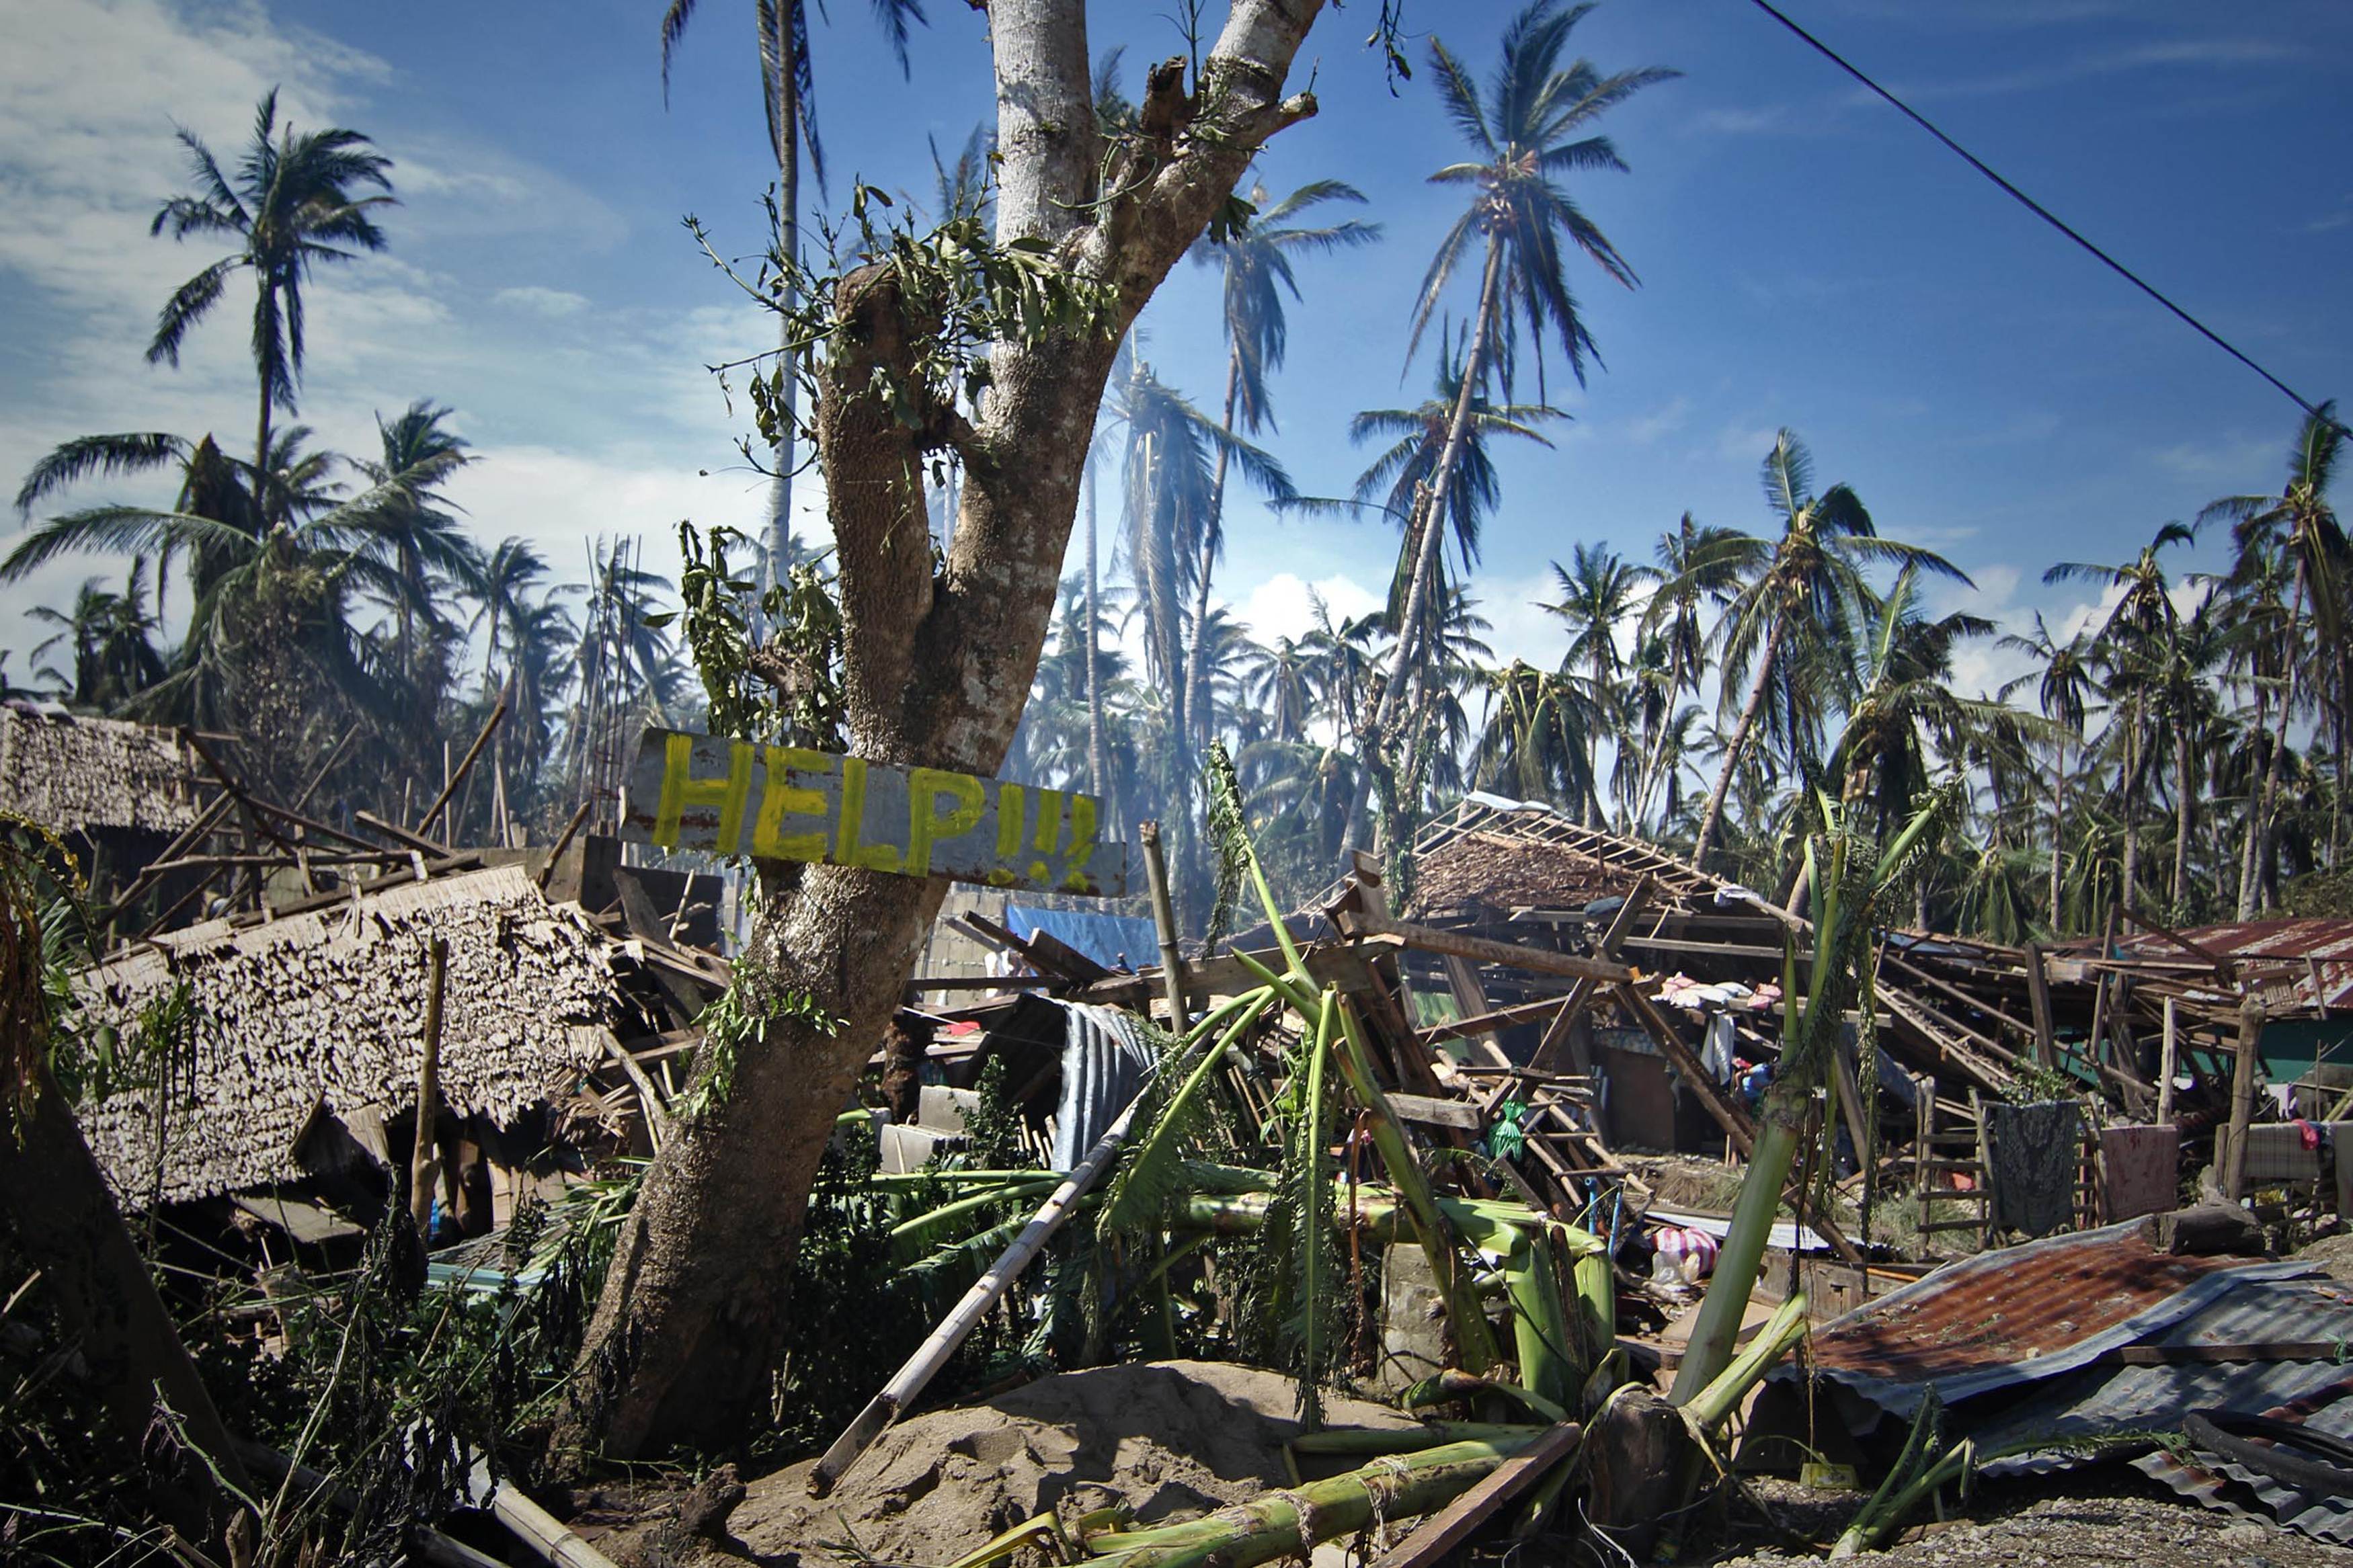 A sign calling for help was seen among the destruction wrought by a typhoon last December in central Philippines. Photo: AFP